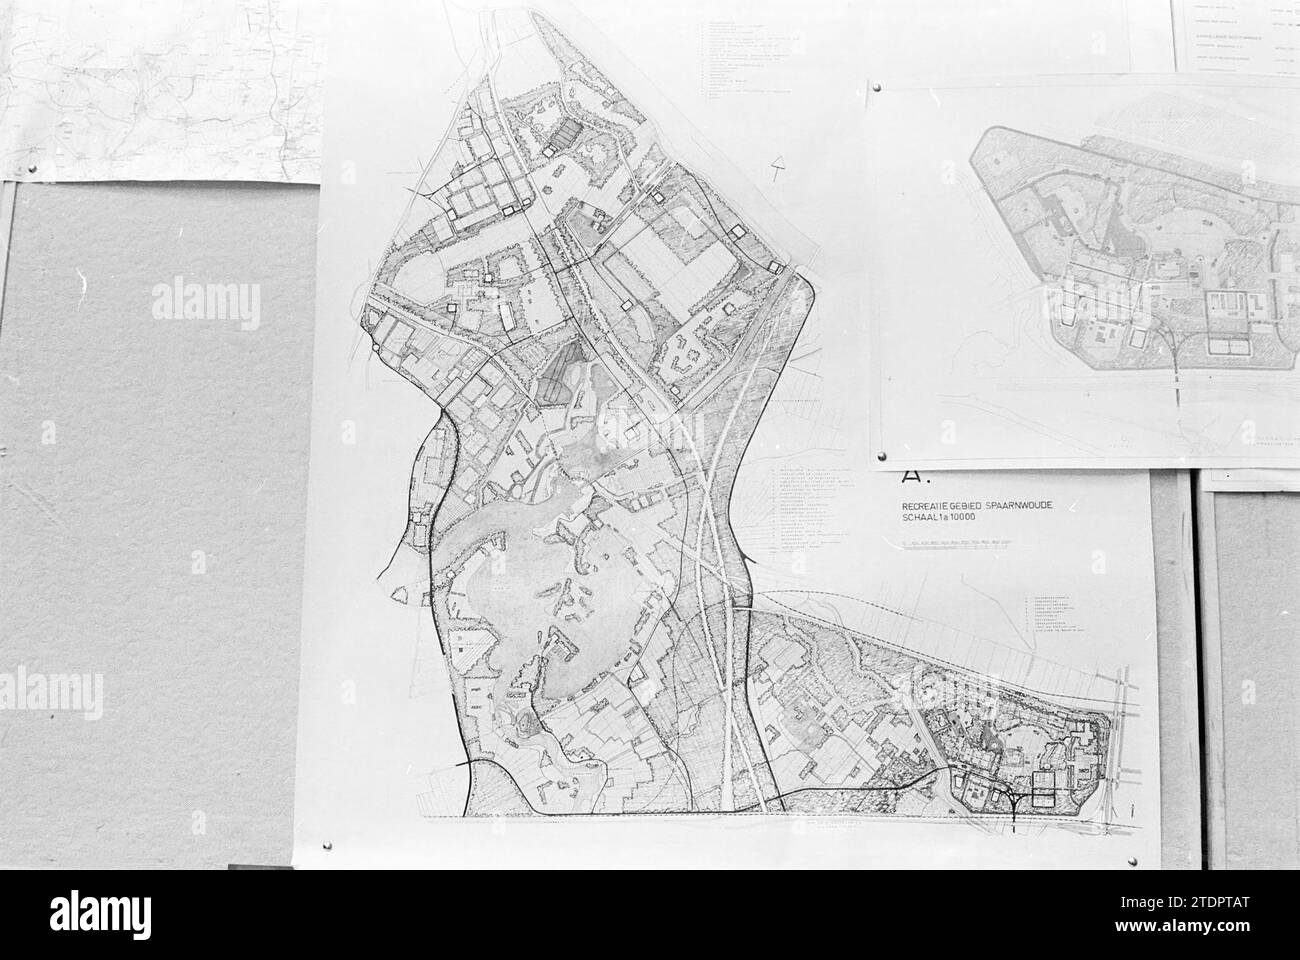 Design drawing of the Spaarnwoude recreation area, 28-02-1968, Whizgle News from the Past, Tailored for the Future. Explore historical narratives, Dutch The Netherlands agency image with a modern perspective, bridging the gap between yesterday's events and tomorrow's insights. A timeless journey shaping the stories that shape our future Stock Photo